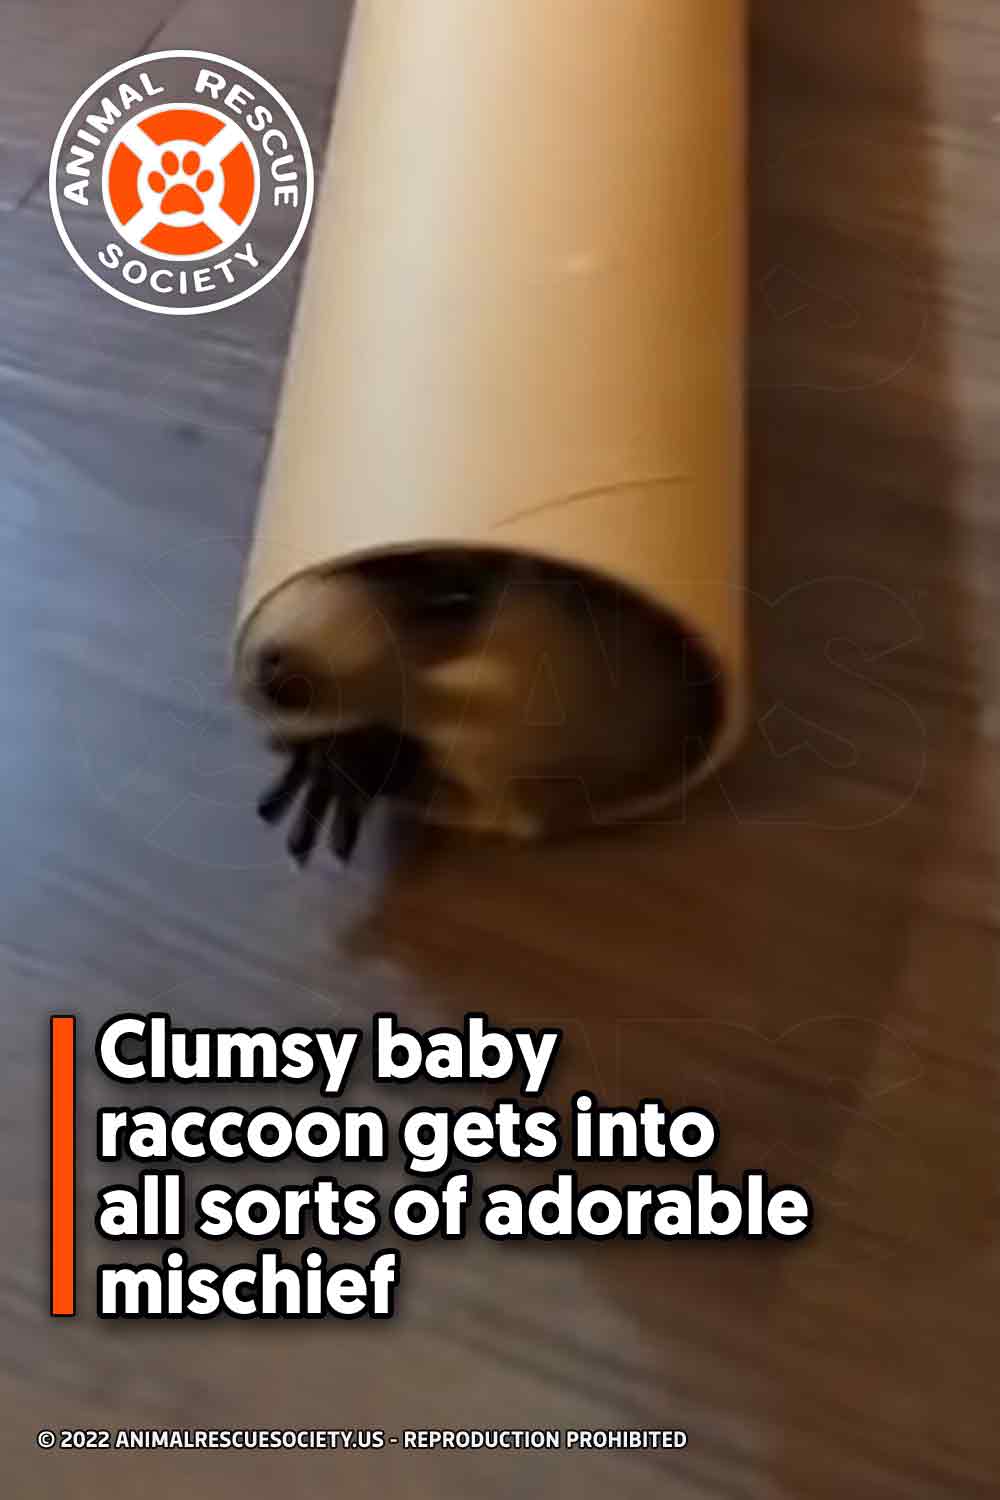 Clumsy baby raccoon gets into all sorts of adorable mischief